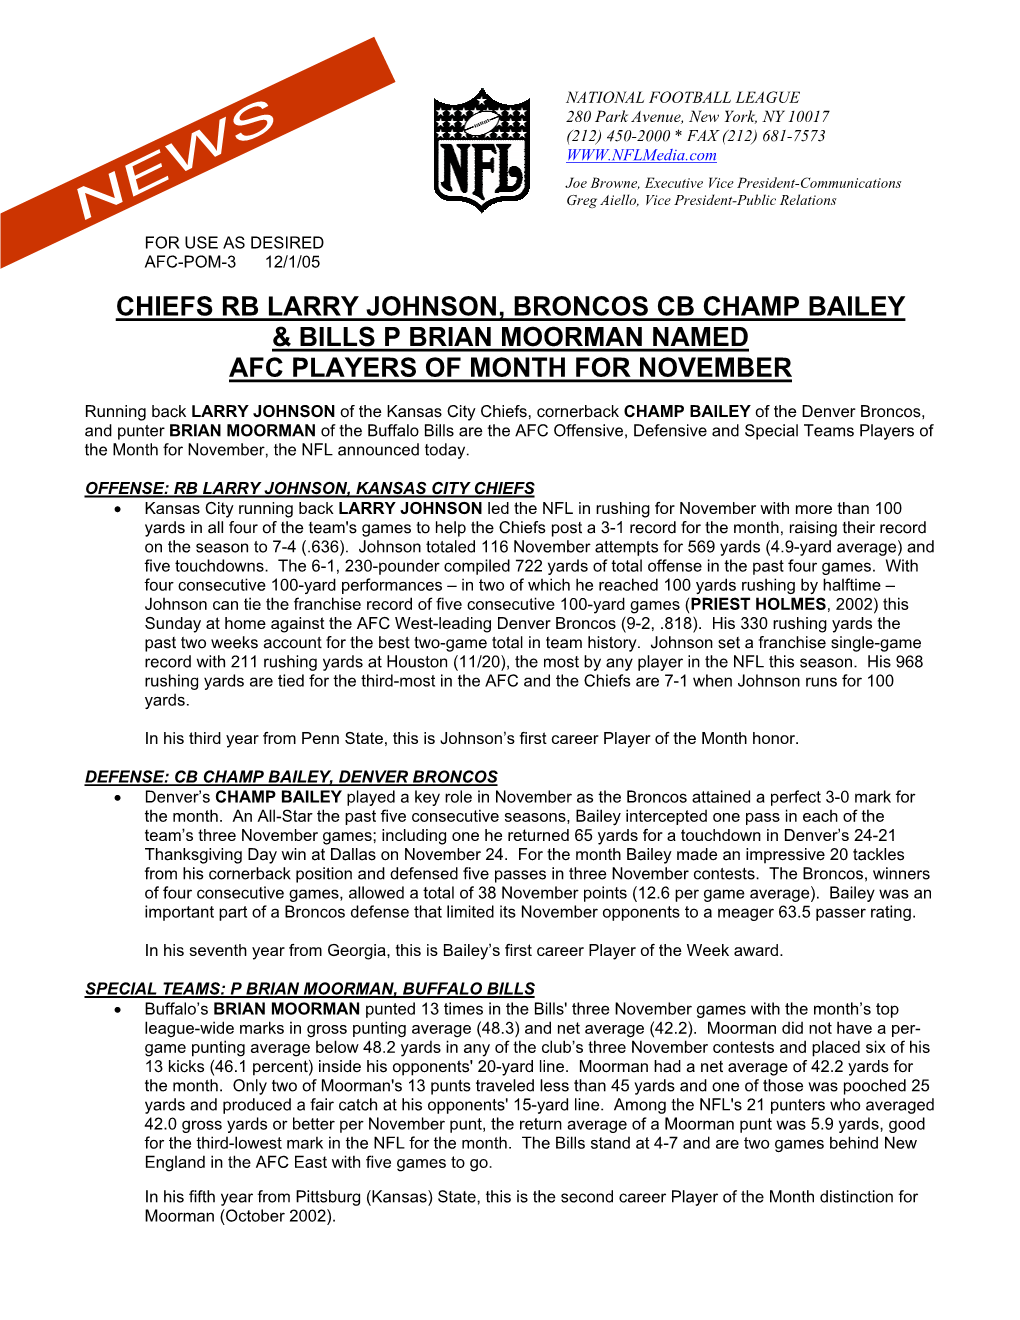 Chiefs Rb Larry Johnson, Broncos Cb Champ Bailey & Bills P Brian Moorman Named Afc Players of Month for November